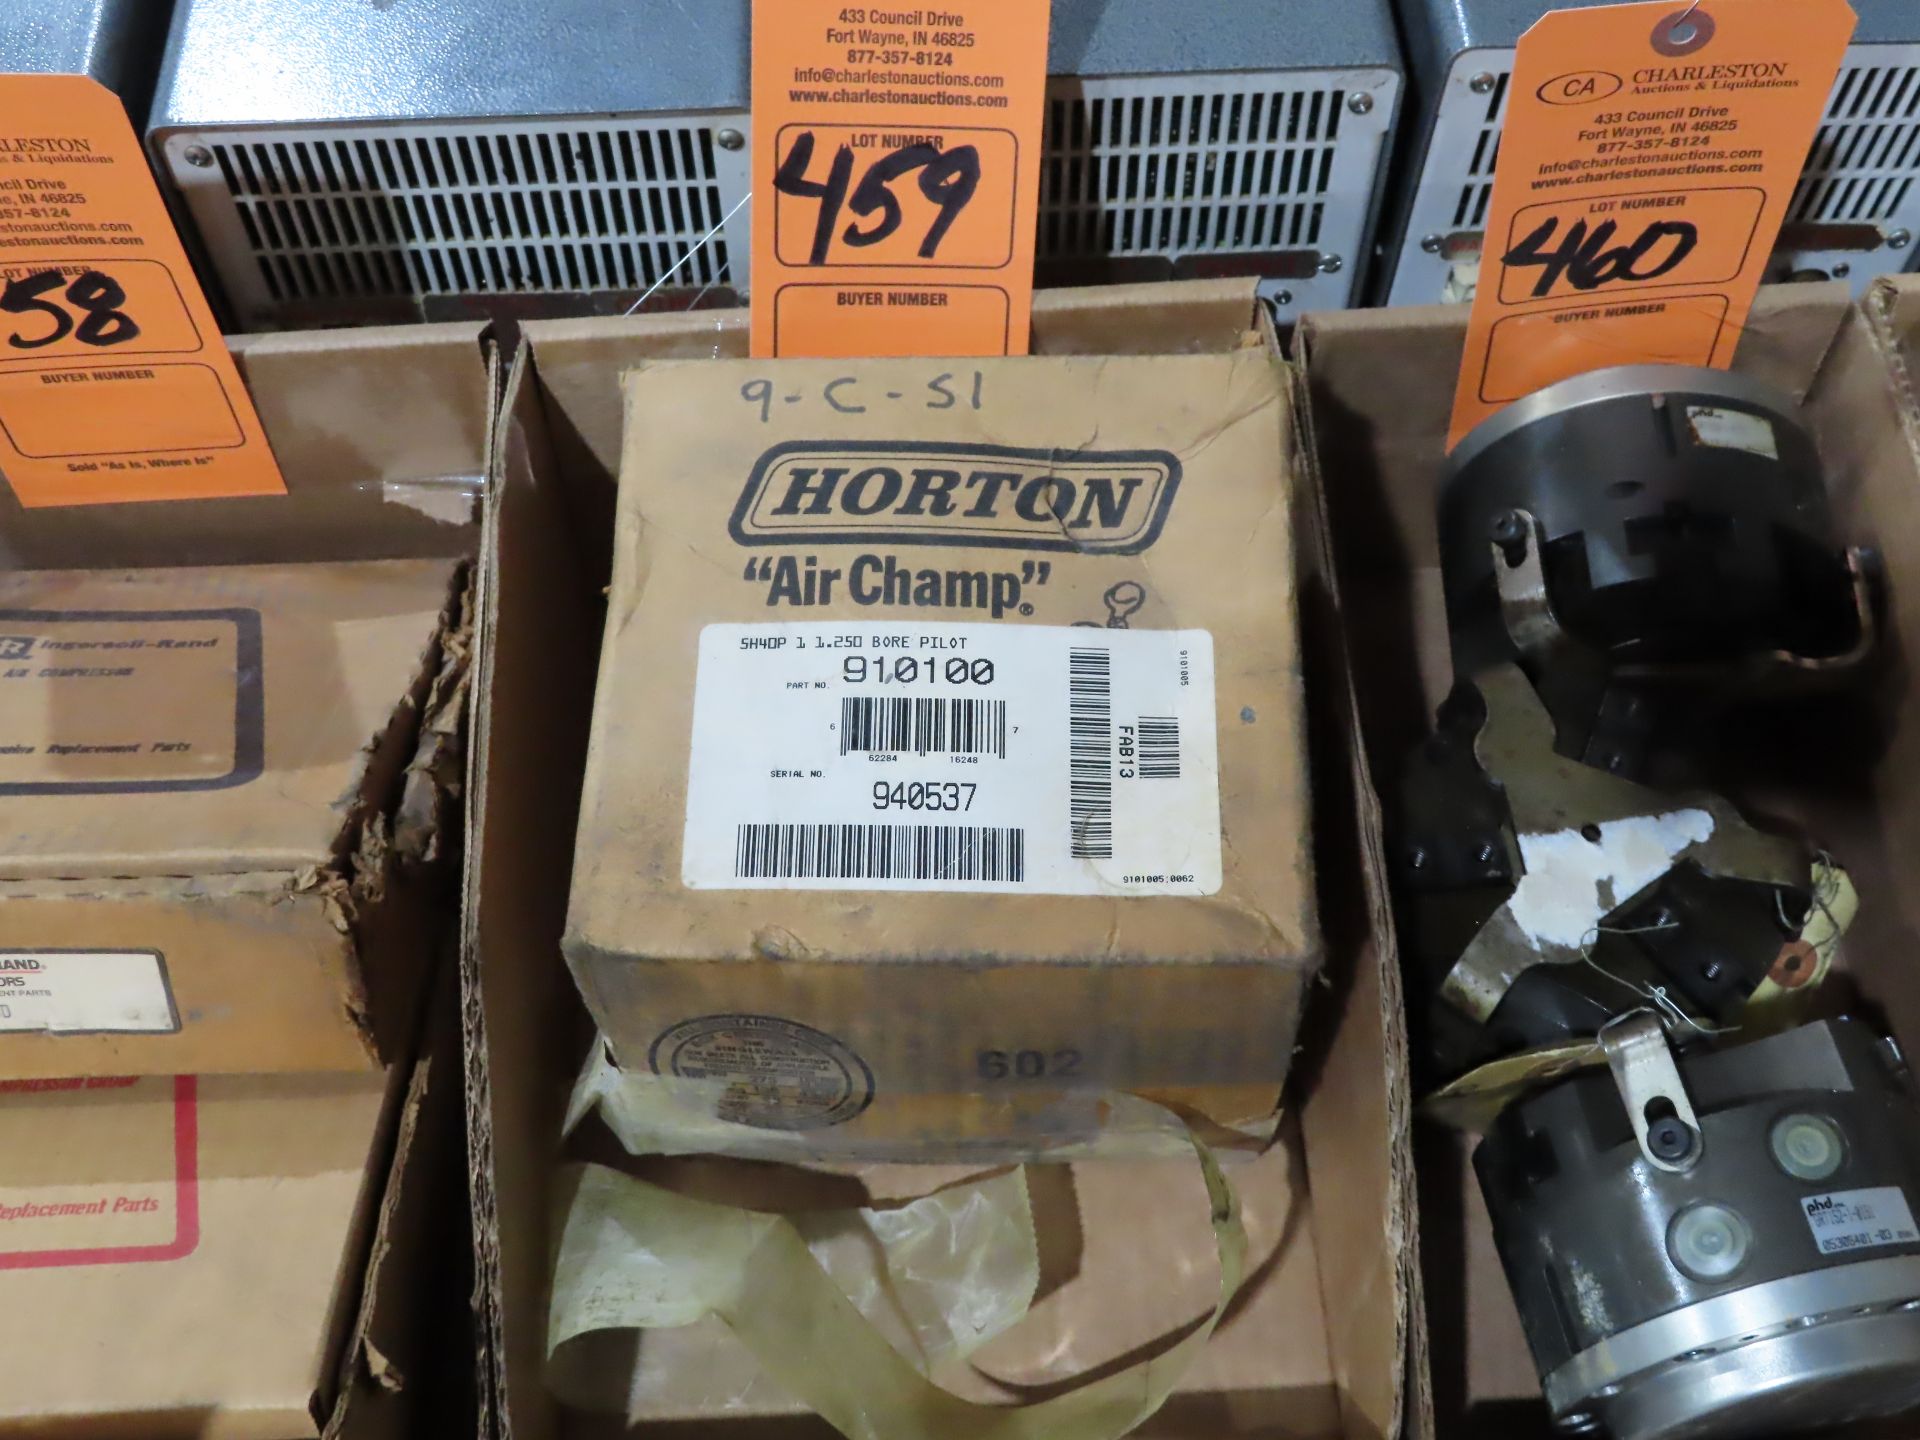 Horton Air Champ model 910100, new in box, as always with Brolyn LLC auctions, all lots can be